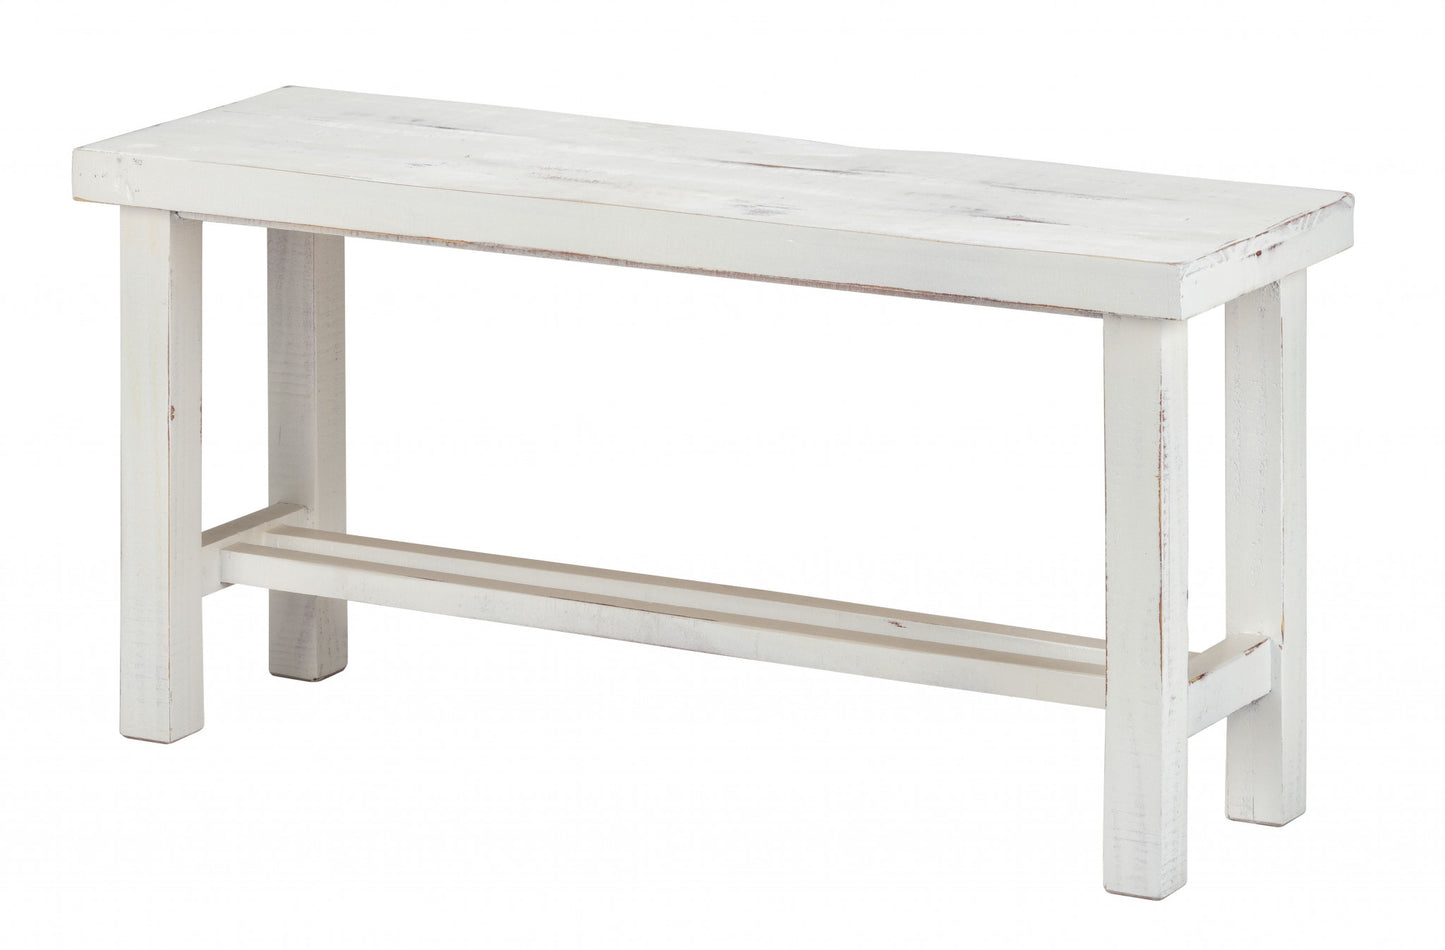 36" Rustic White Distressed Bench By Homeroots